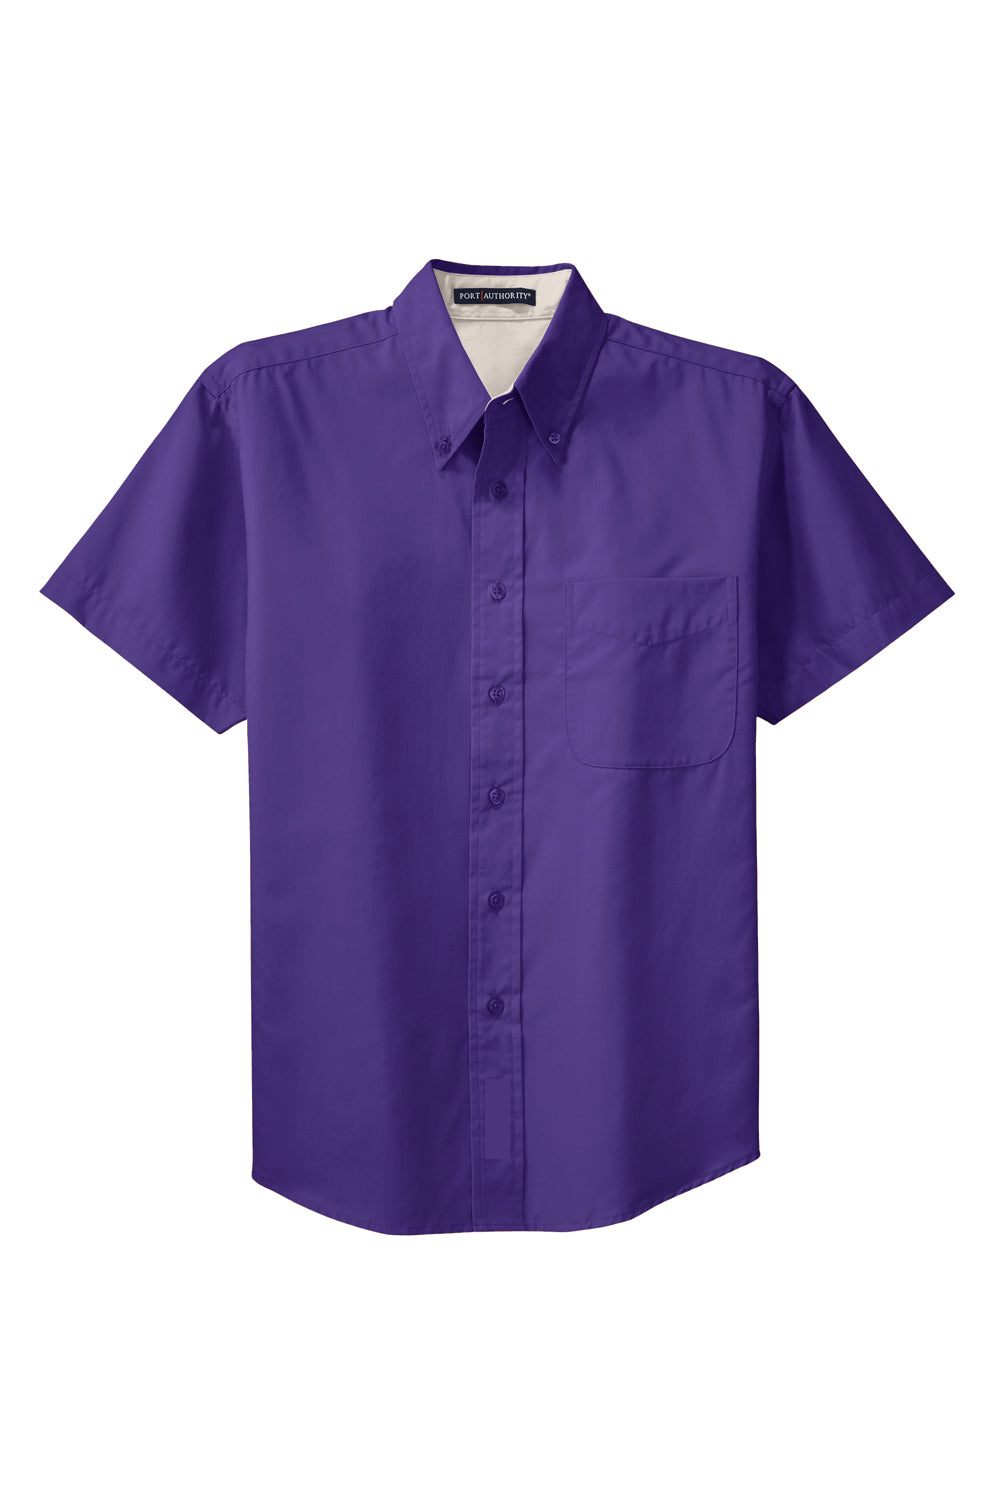 Port Authority S508/TLS508 Mens Easy Care Wrinkle Resistant Short Sleeve Button Down Shirt w/ Pocket Purple Flat Front